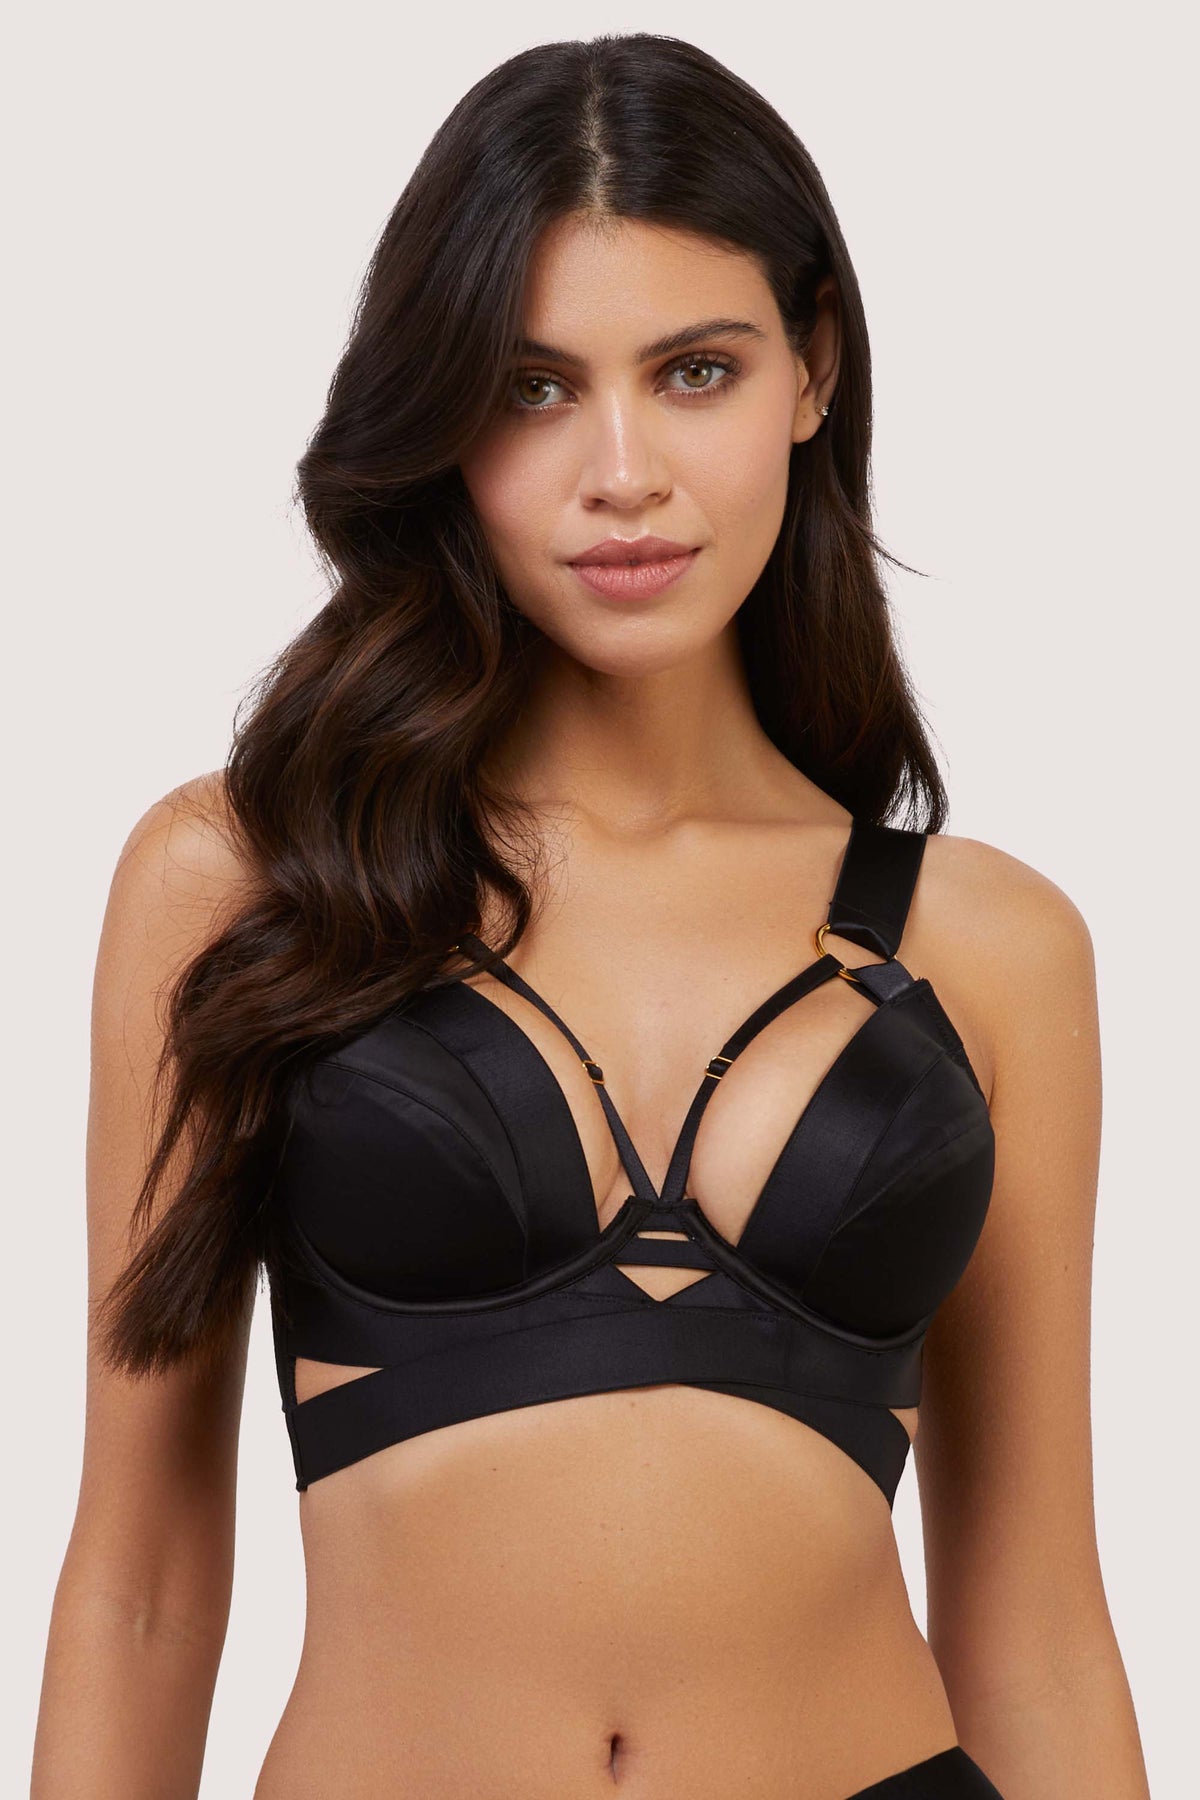 model wears balck stain and mesh plunge bra with straps